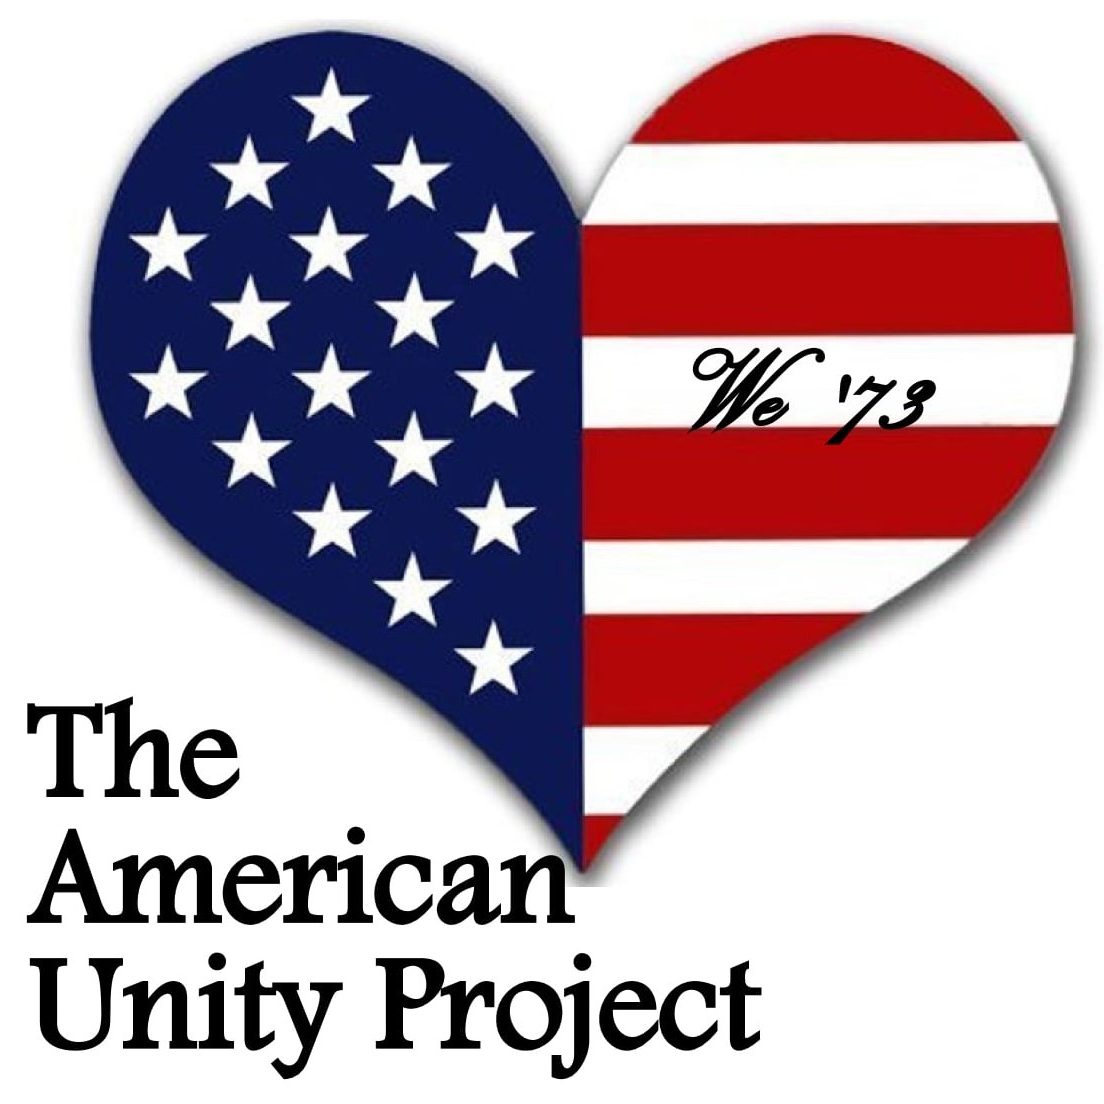 We '73 The American Unity Project